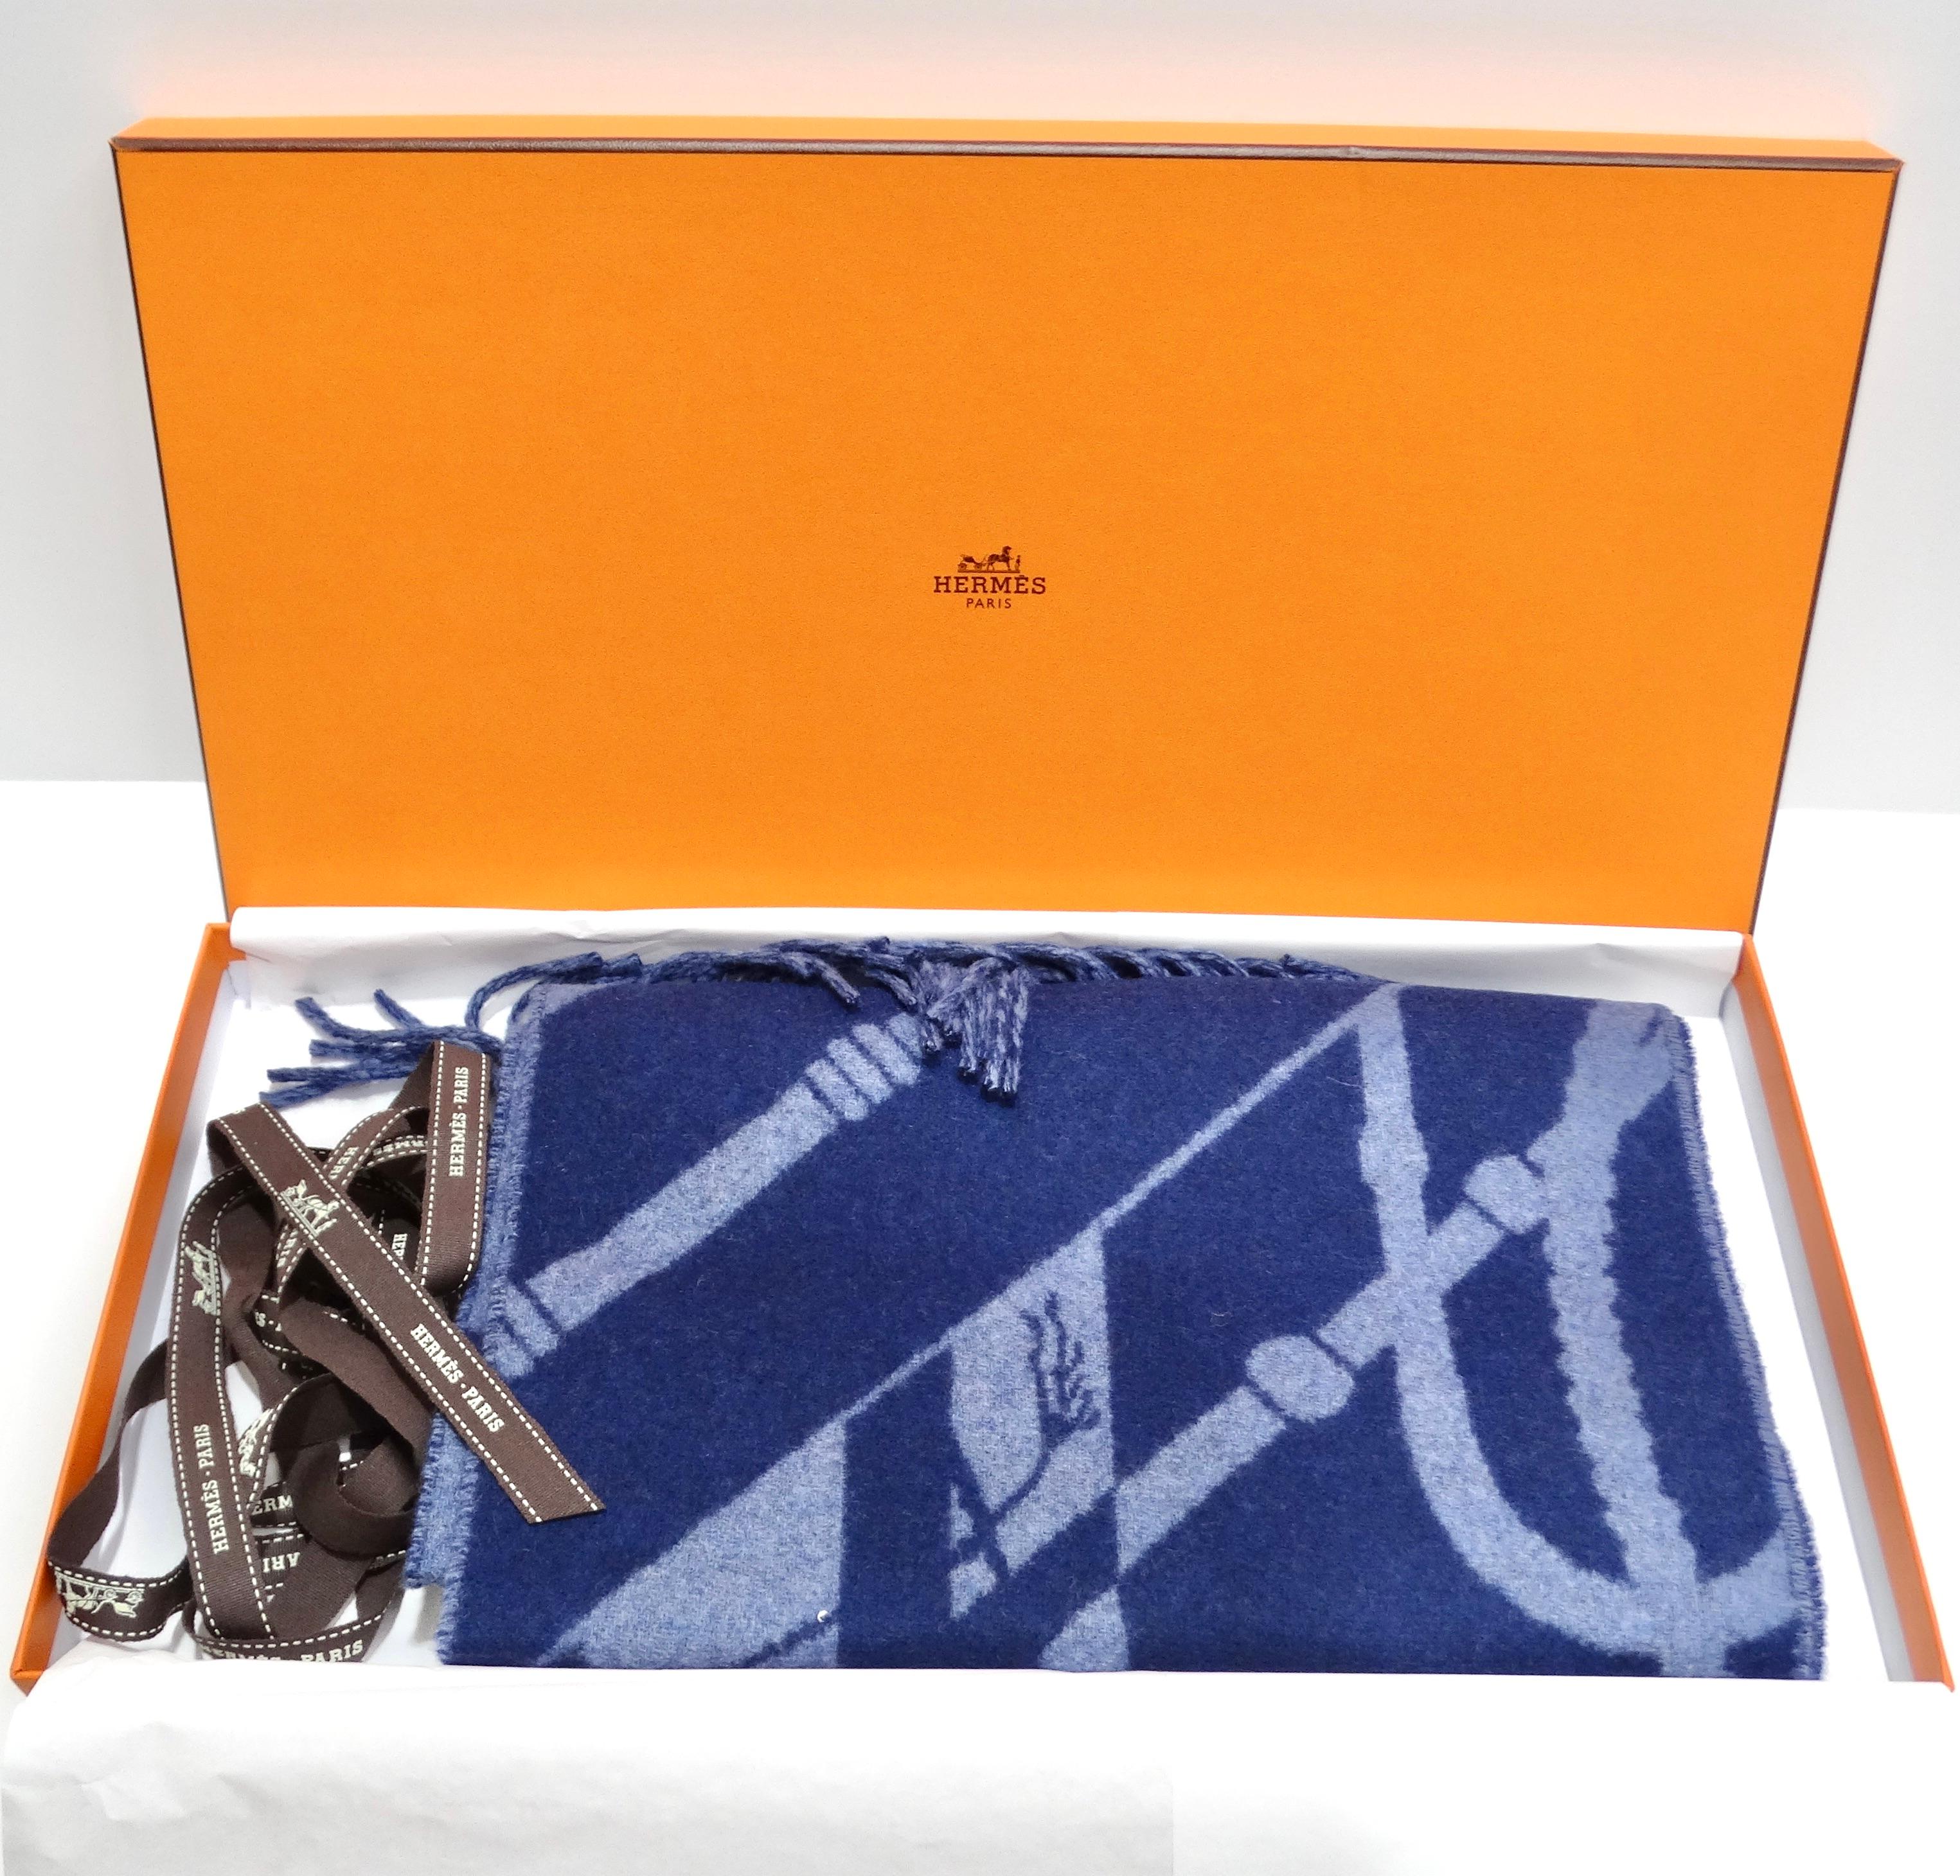 Hermes Blue Cashmere Scarf In New Condition For Sale In Scottsdale, AZ